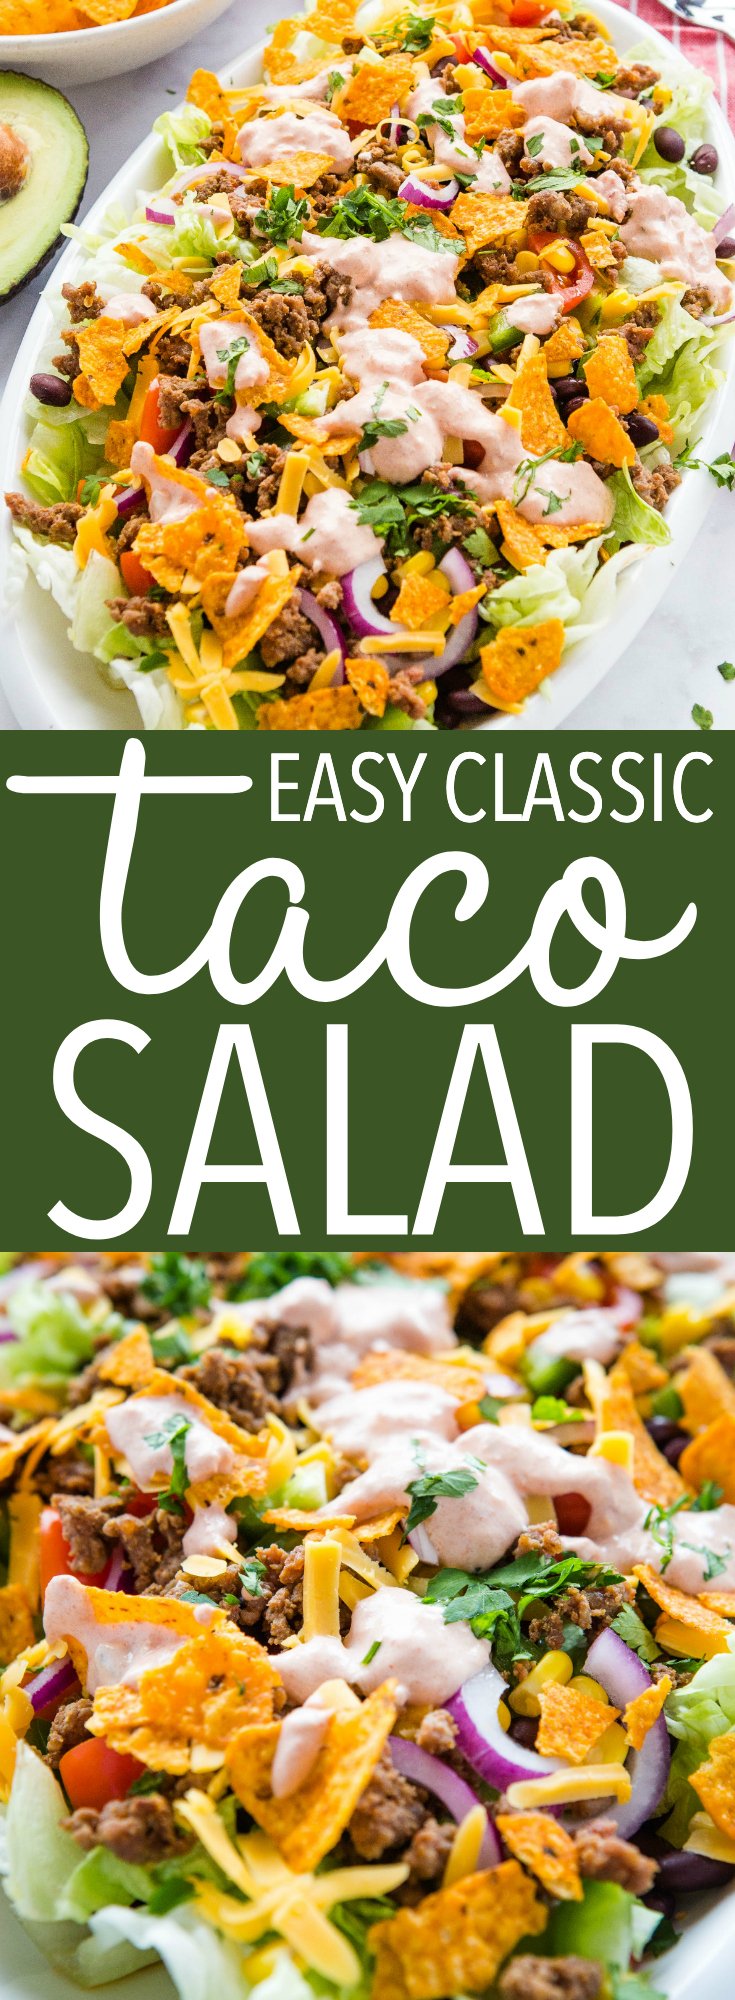 This easy taco salad recipe is easy to make and perfect for an light meal or side dish. Make it with ground beef or turkey in under 30 minutes! Recipe from thebusybaker.ca! #taco #tacosalad #tacotuesday #sidedish #summer #barbecue #potluck #mexican #texmex #easyrecipe #familymeal #weeknightmeal via @busybakerblog